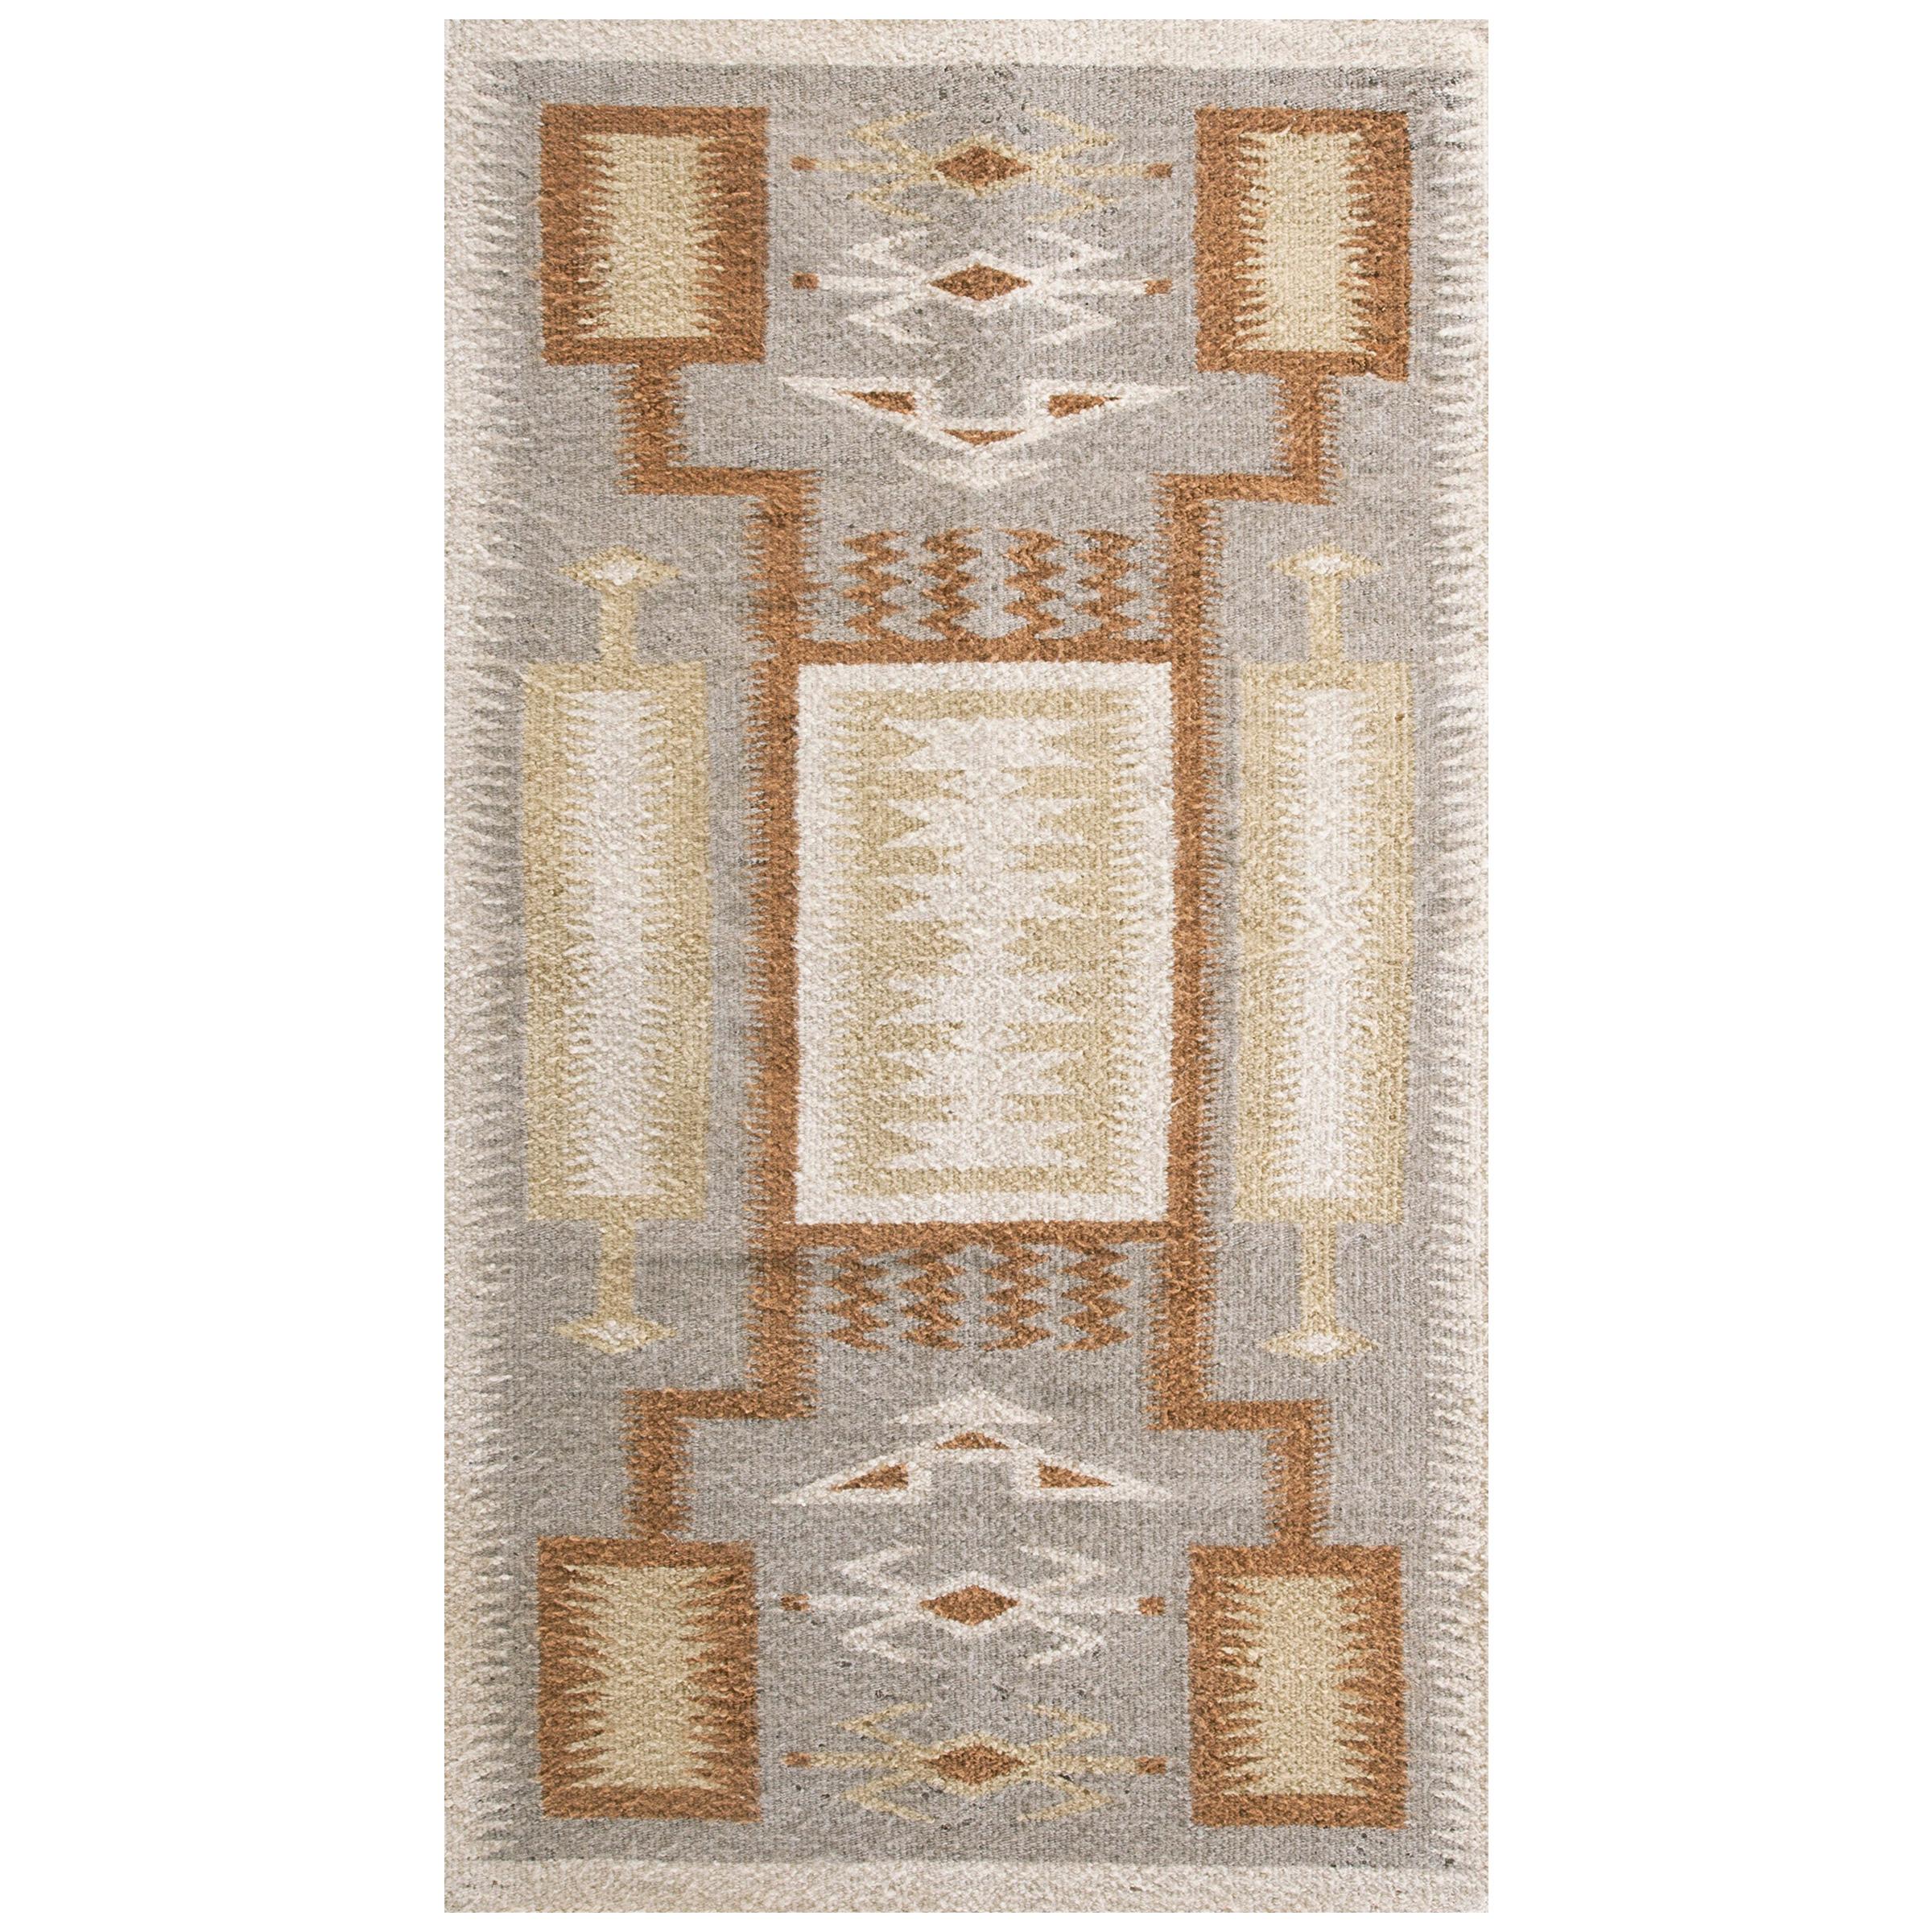 1930s American Navajo Storm Pattern Rug ( 2'7" x 4'8" - 79 x 142 ) For Sale